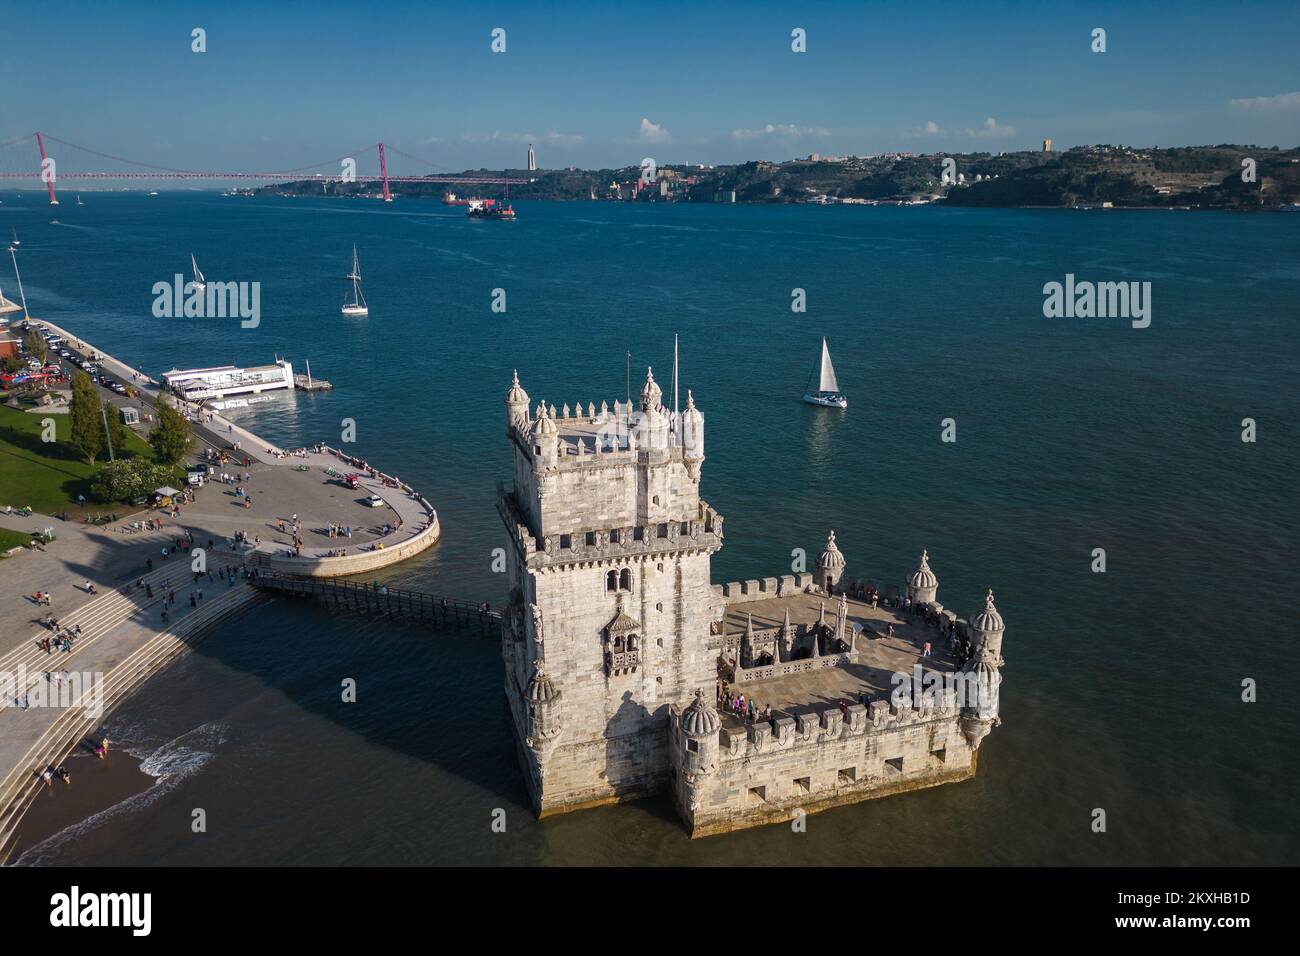 Aerial view of historic landmark Belem Tower (Portuguese: Torre de Belem ) on the northern bank of the Tagus River in Lisbon, Portugal. Stock Photo